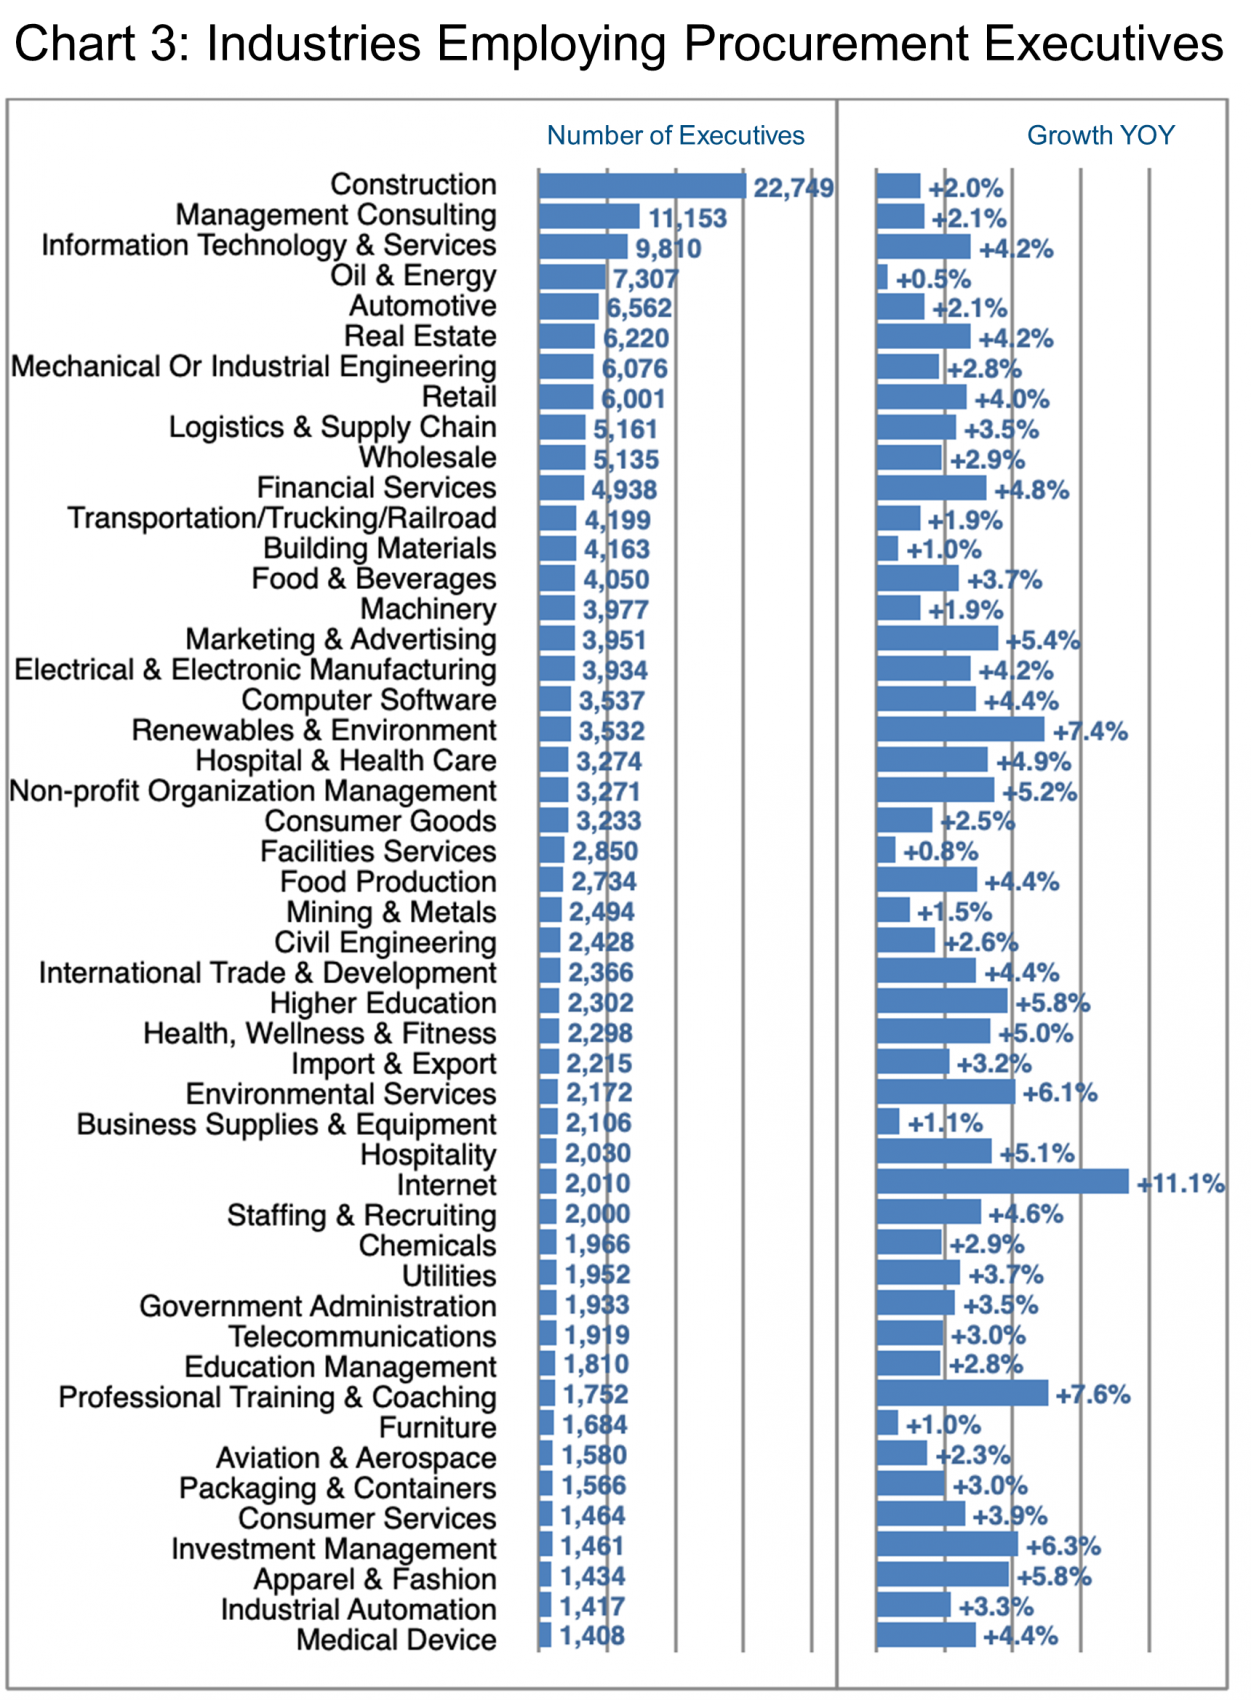 Industries Employing Procurement Executivtes- Chart 3